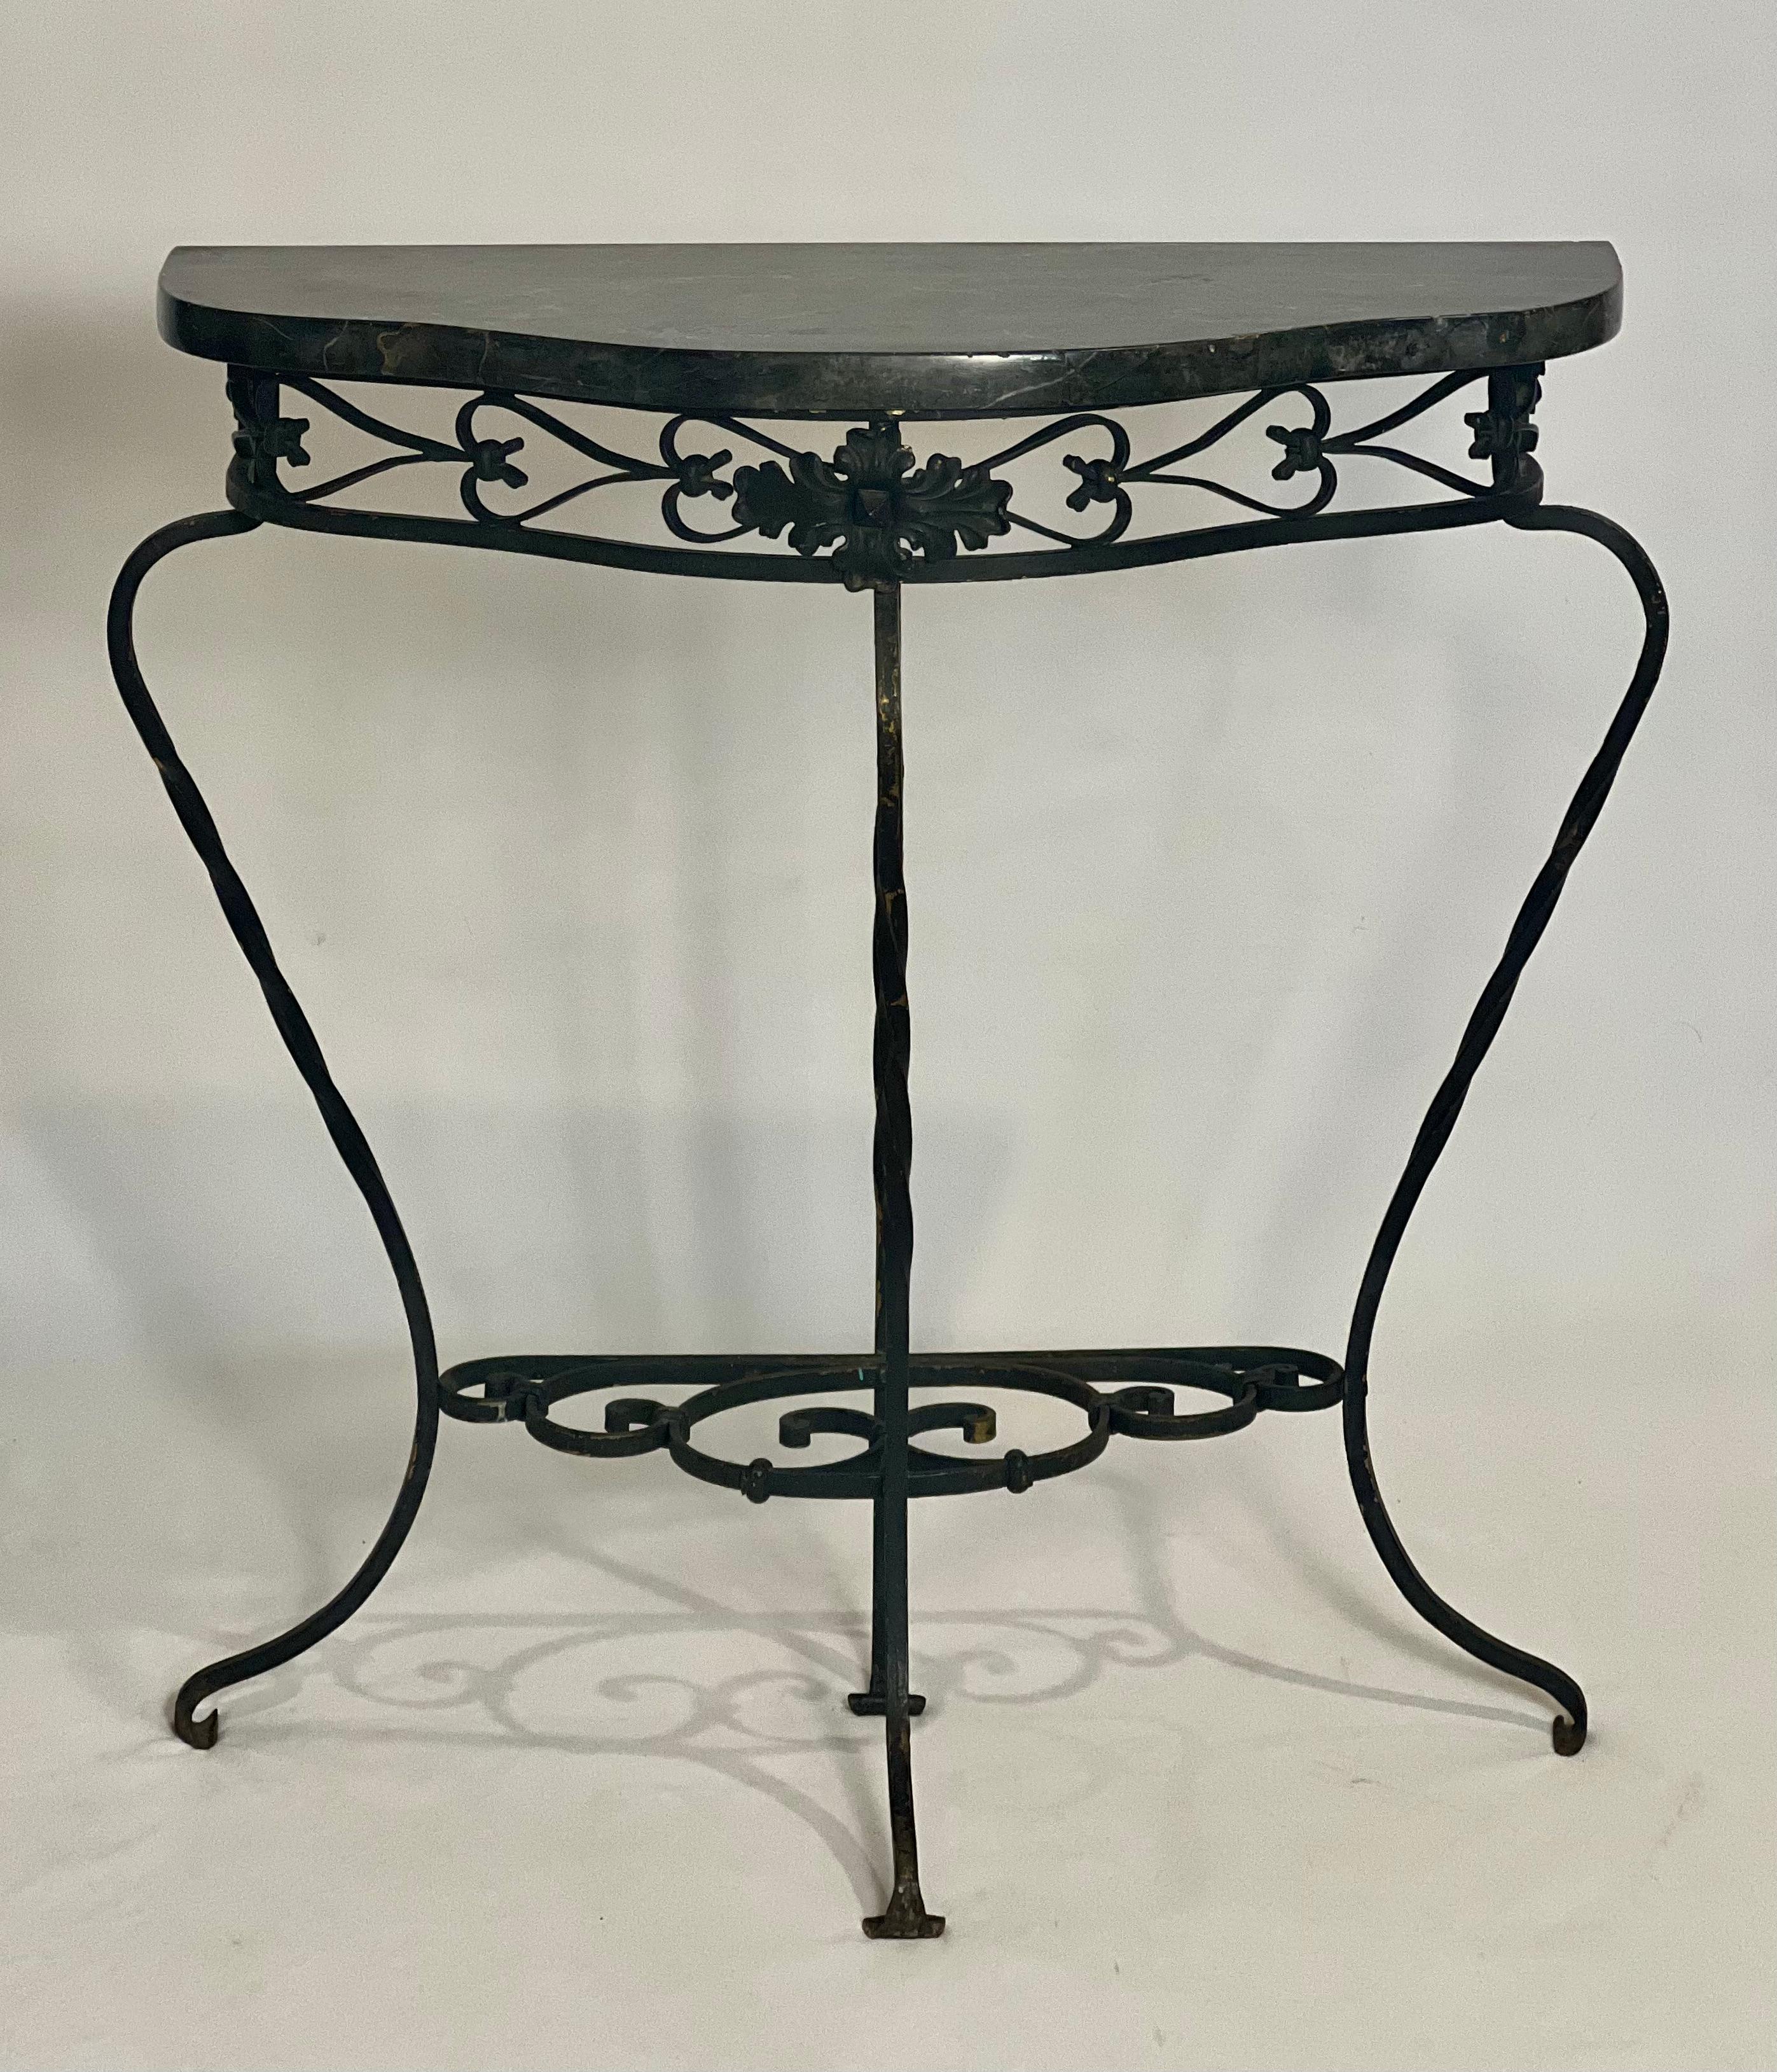 Fantastic Neoclassical style wrought iron and marble console, France, circa 1880-1900.

A lovely table adorned with elegant iron work including twisted cabriole legs, a central high-relief flower head and scroll detail possibly inspired by a Spanish